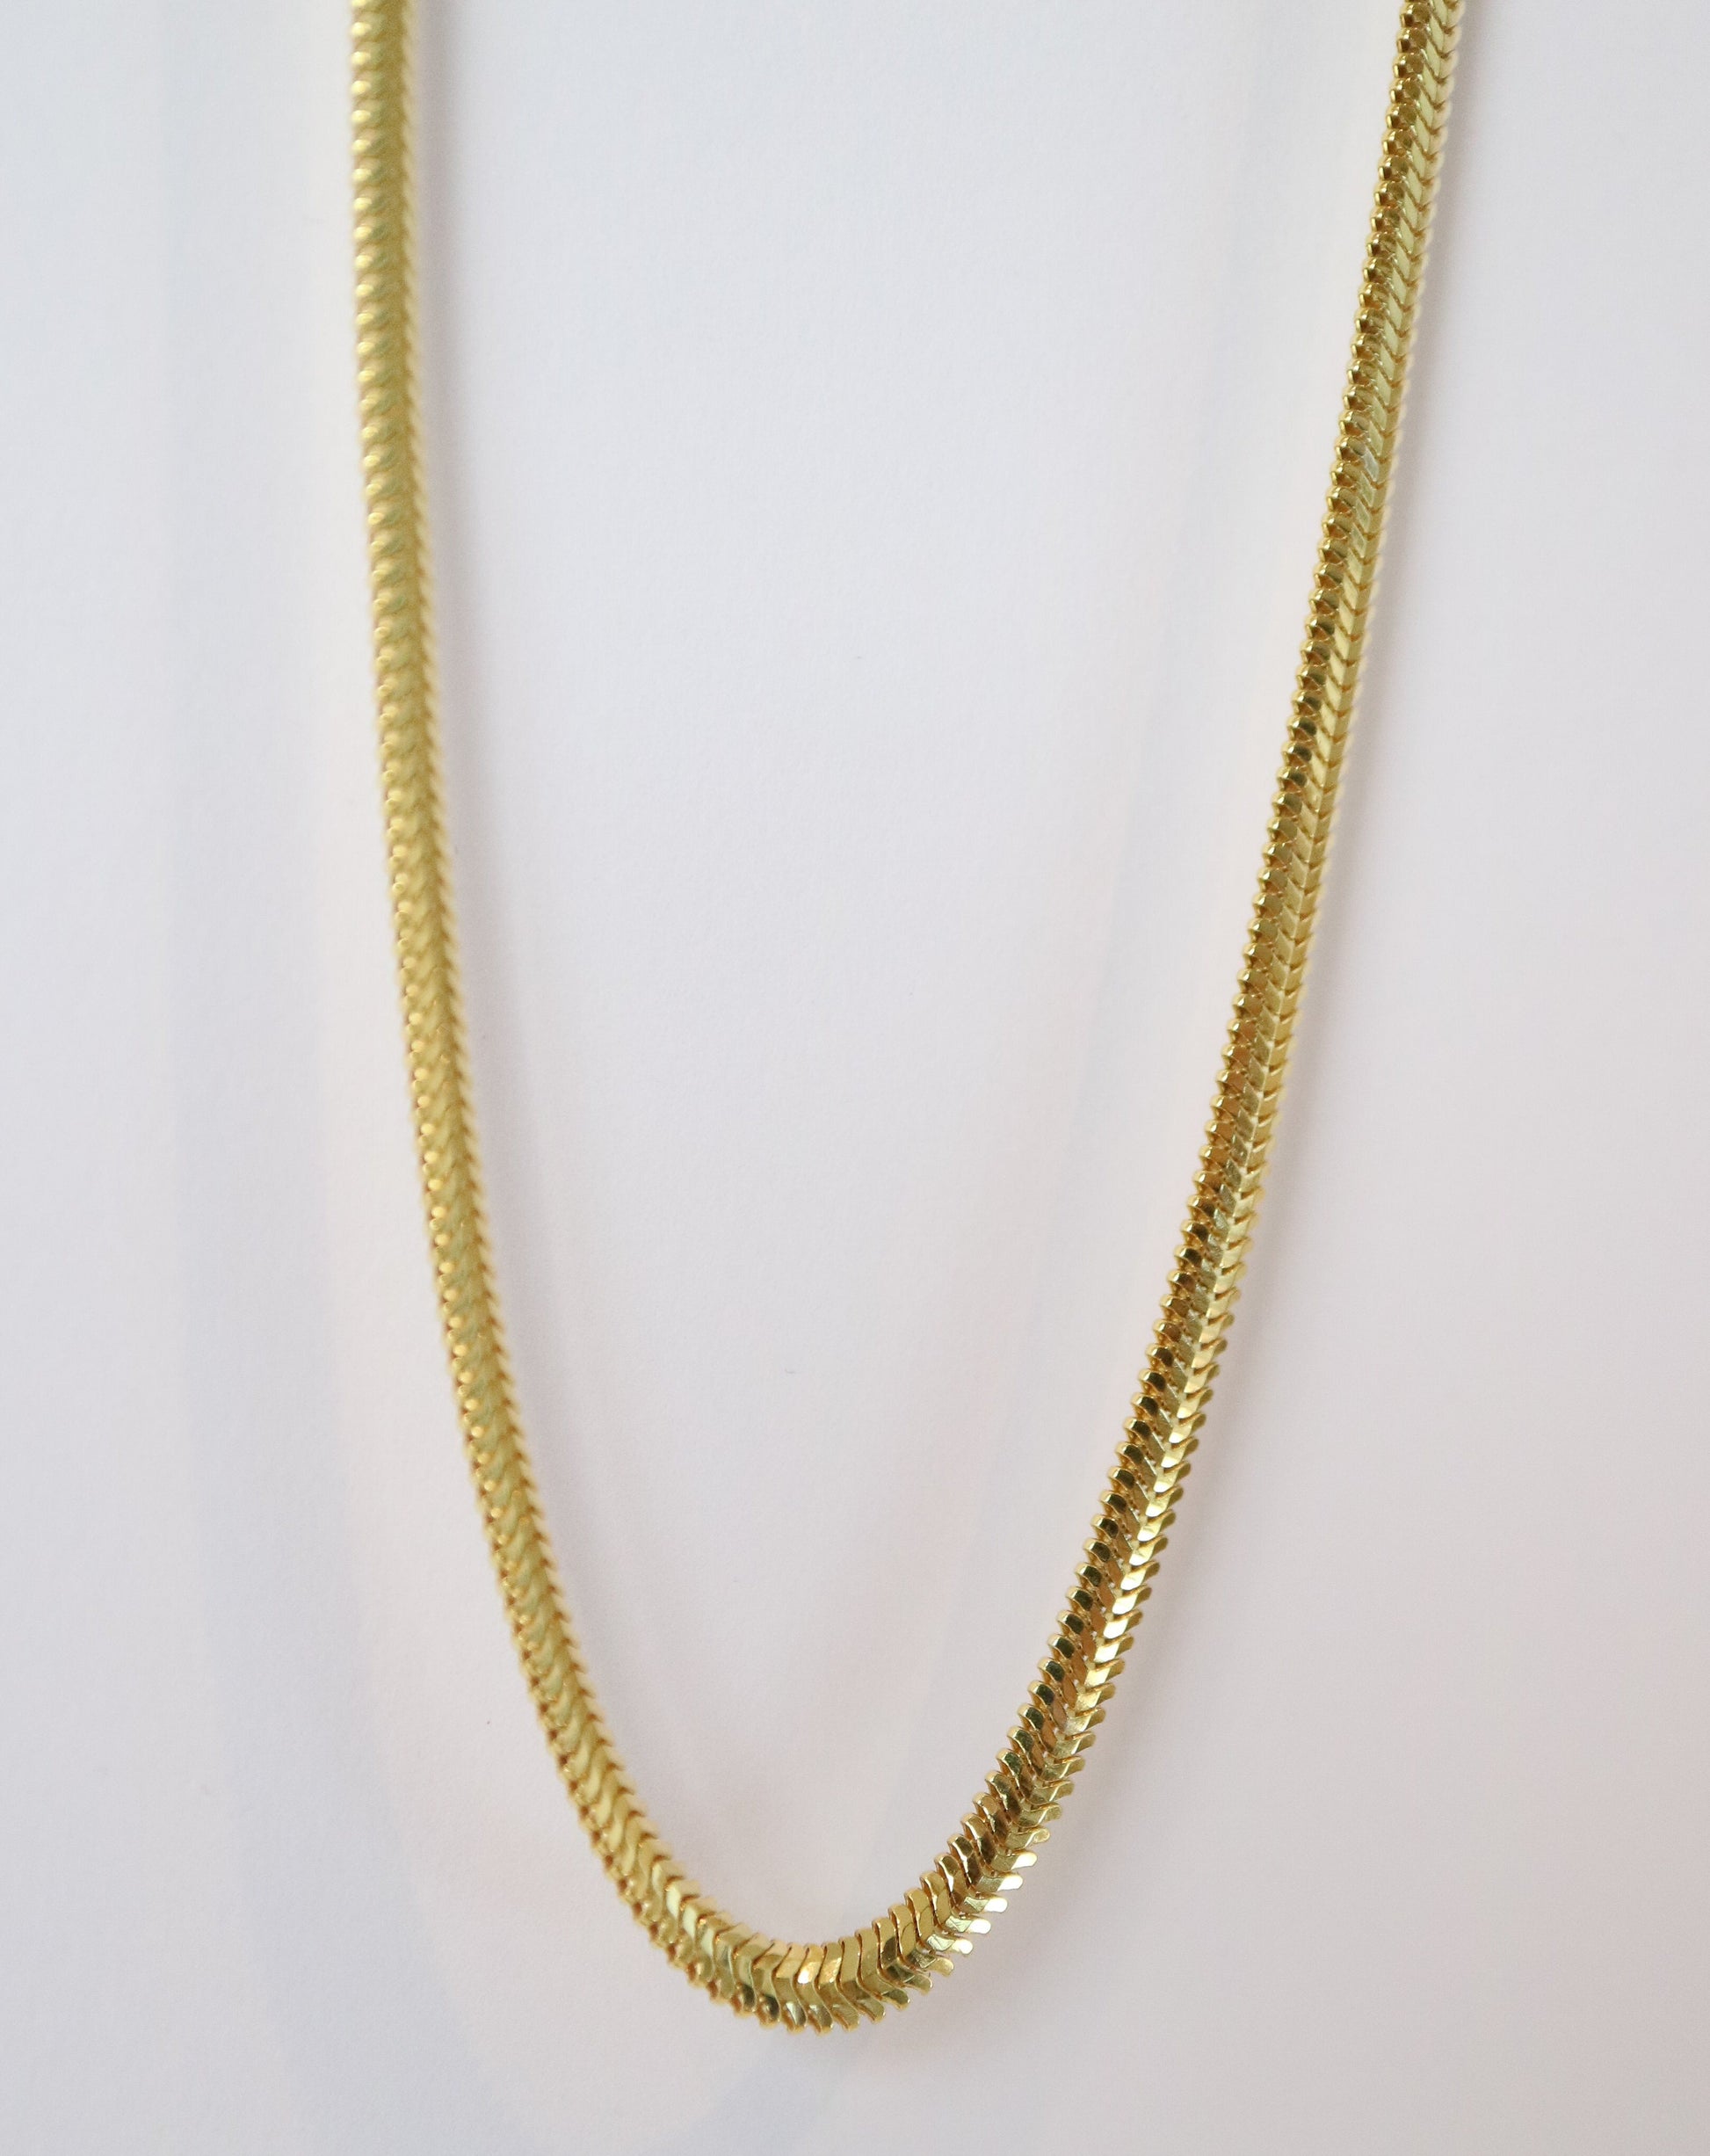 Sphinx Snake Chain in gold plated silver